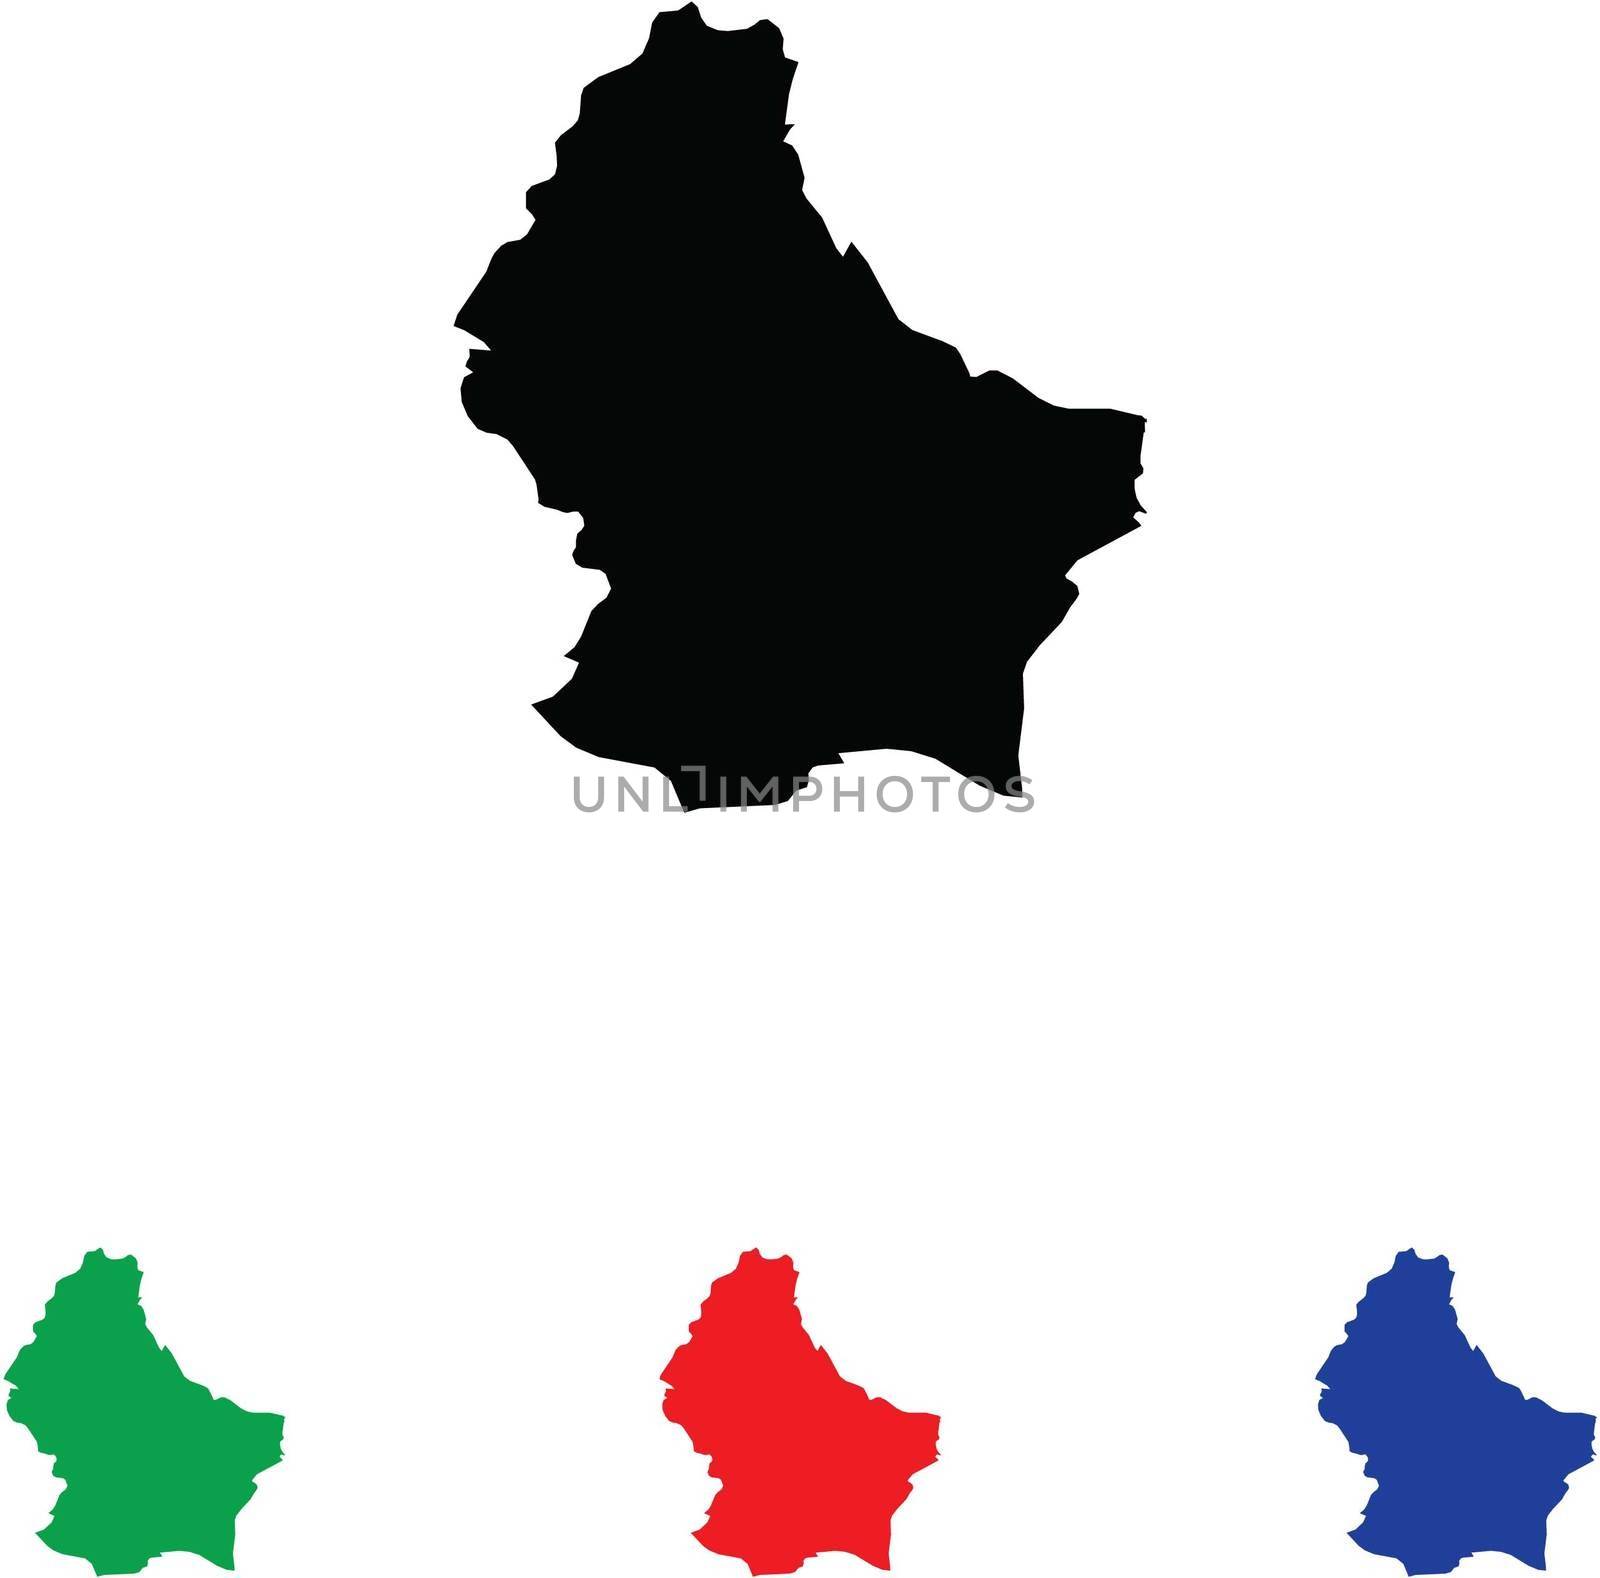 Luxembourg Icon Illustration with Four Color Variations